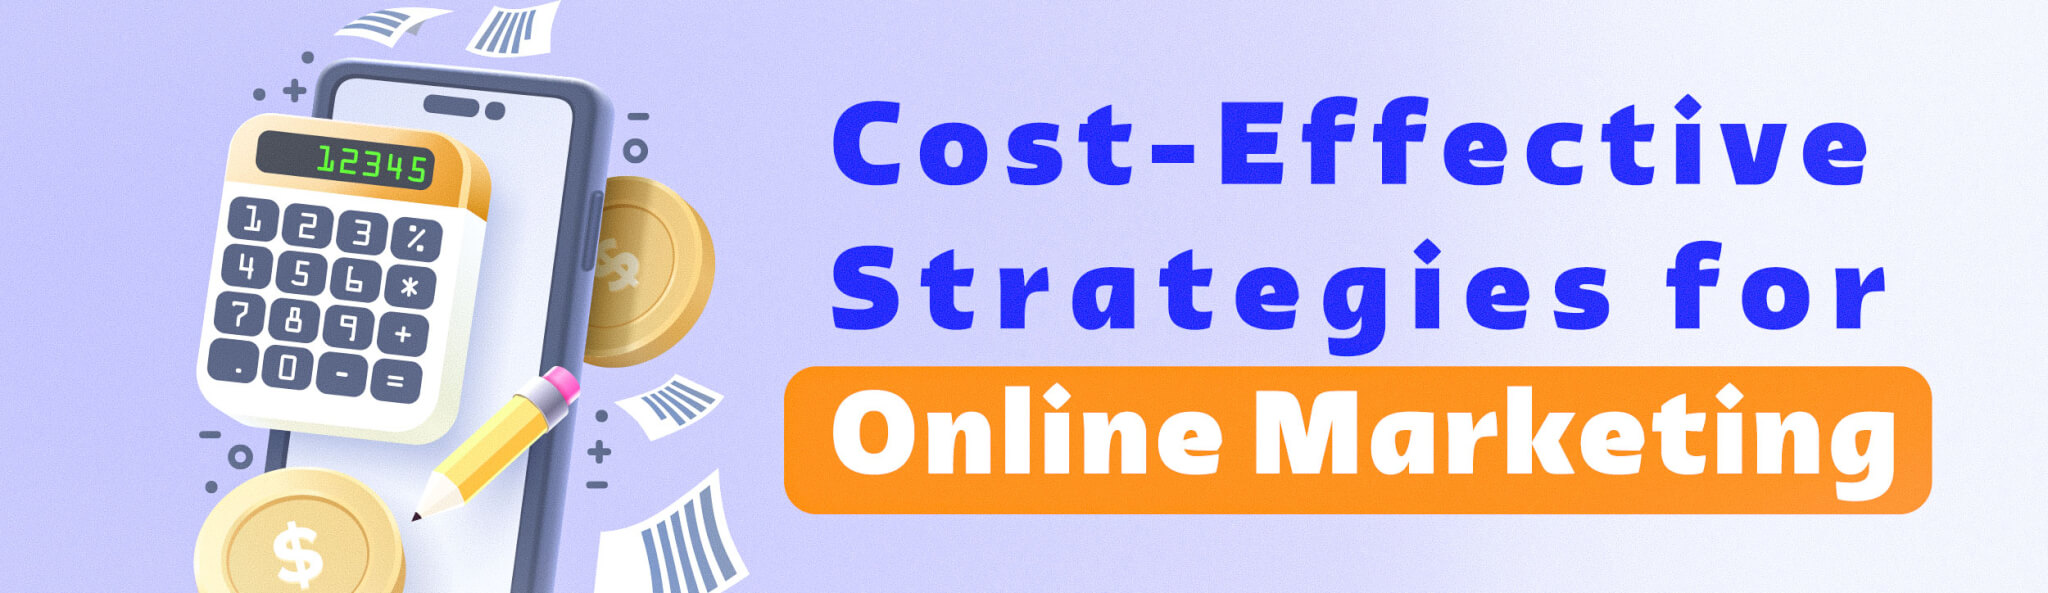 Cost-Effective Strategies for Online Marketing